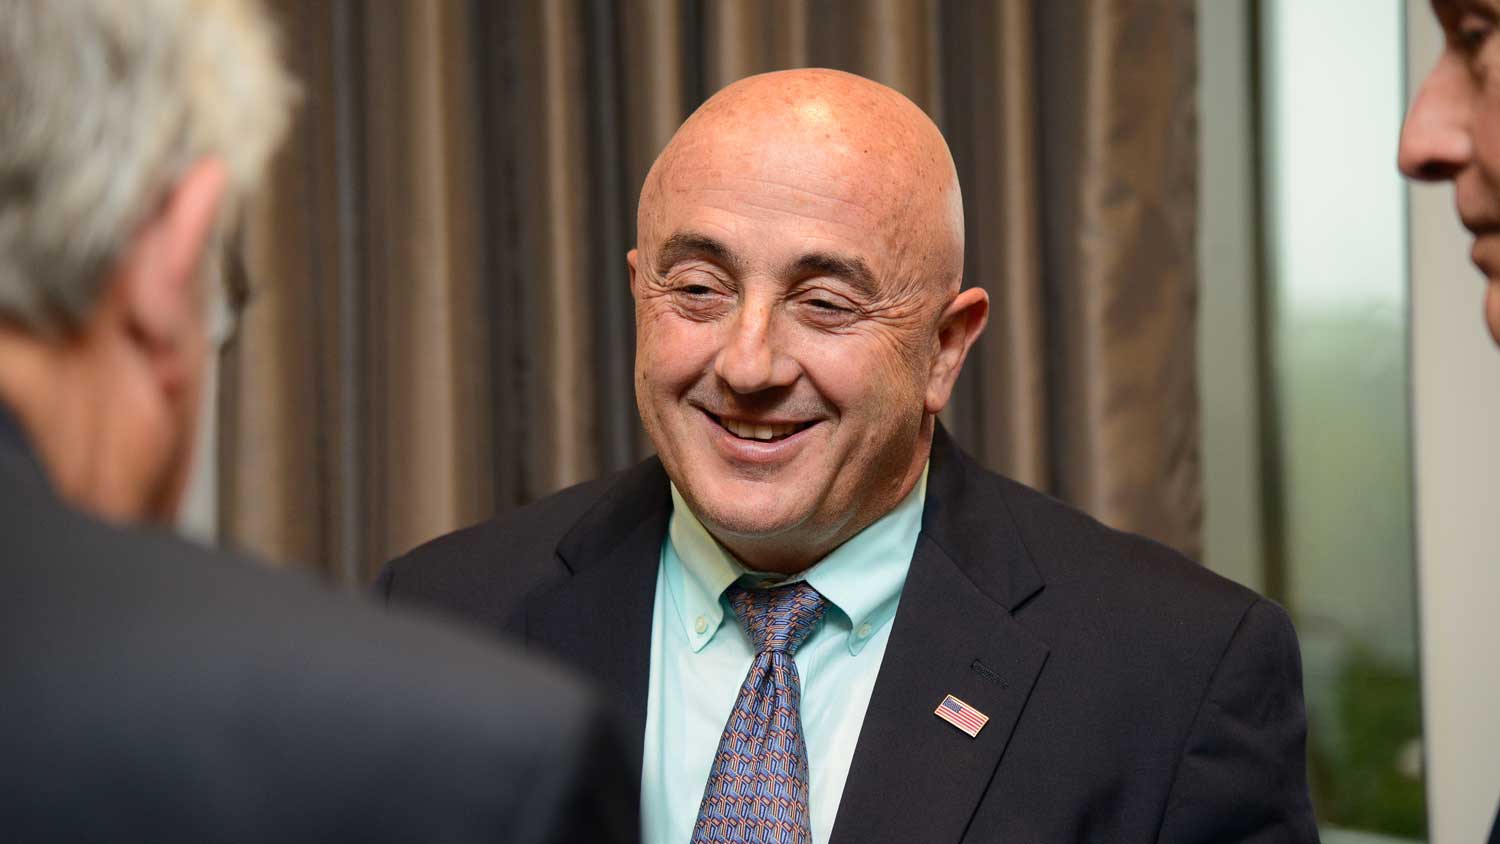 Rich Bonanno smiling at an event